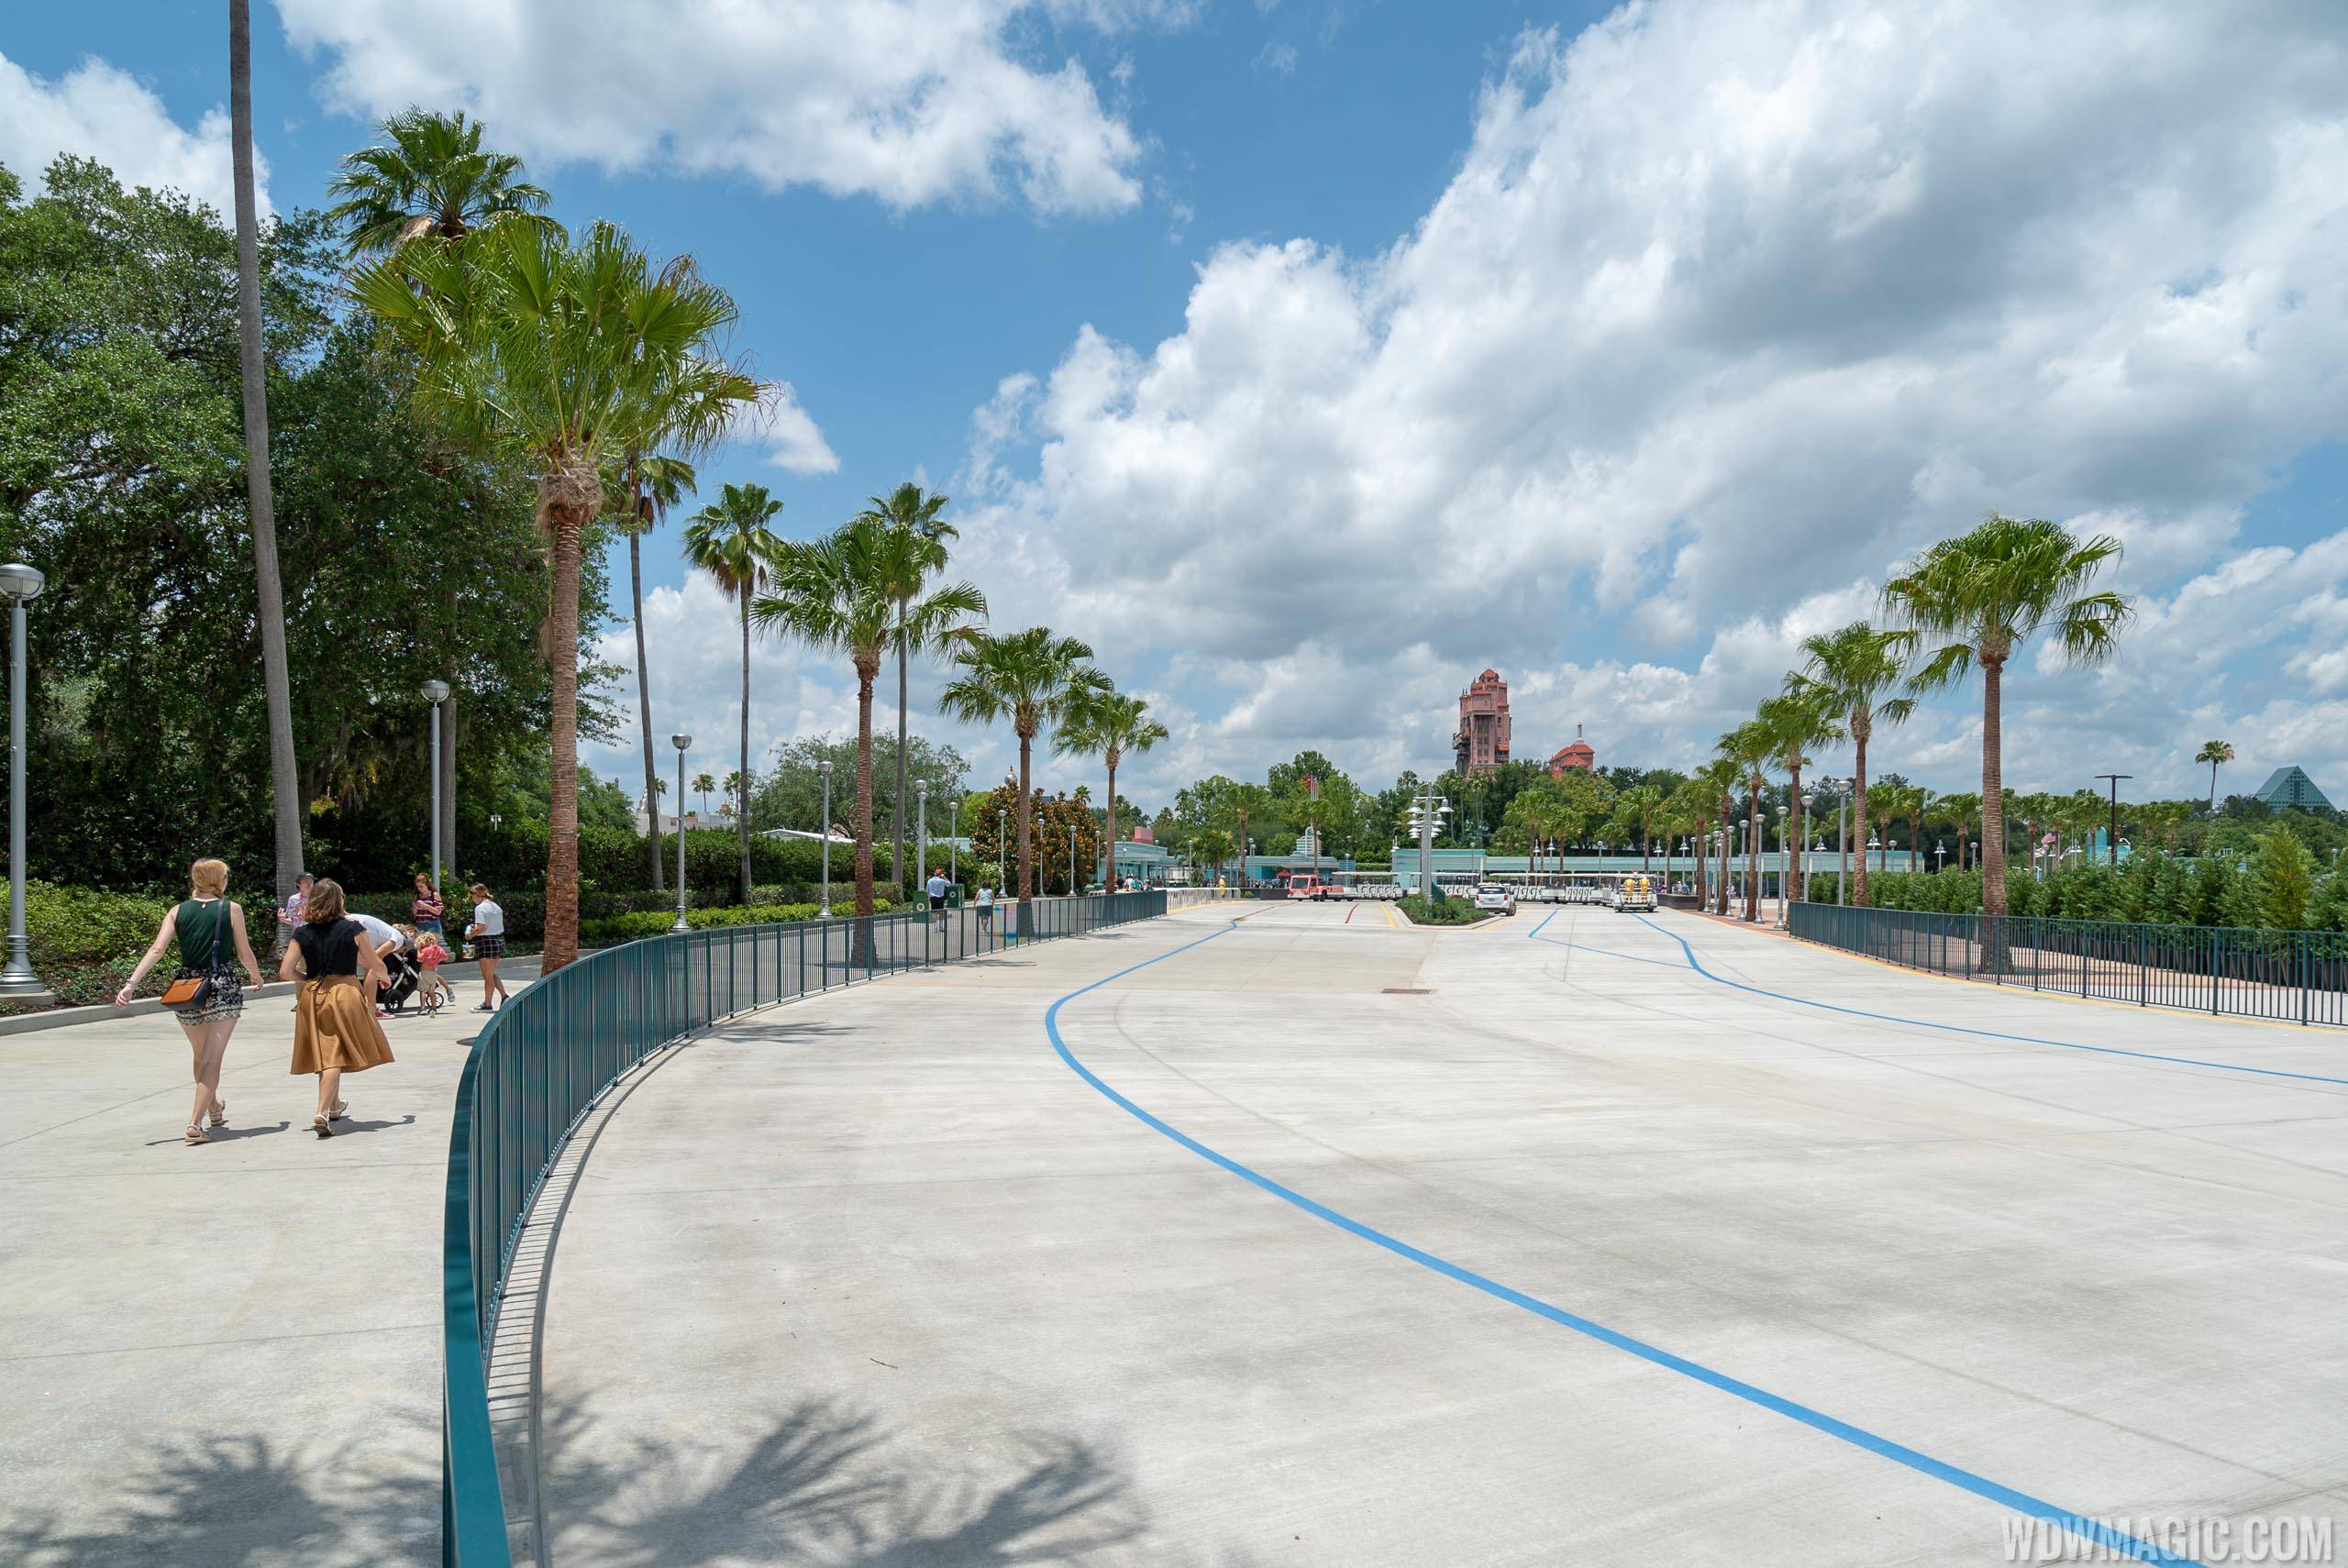 New Tram load area completed at Disney's Hollywood Studios